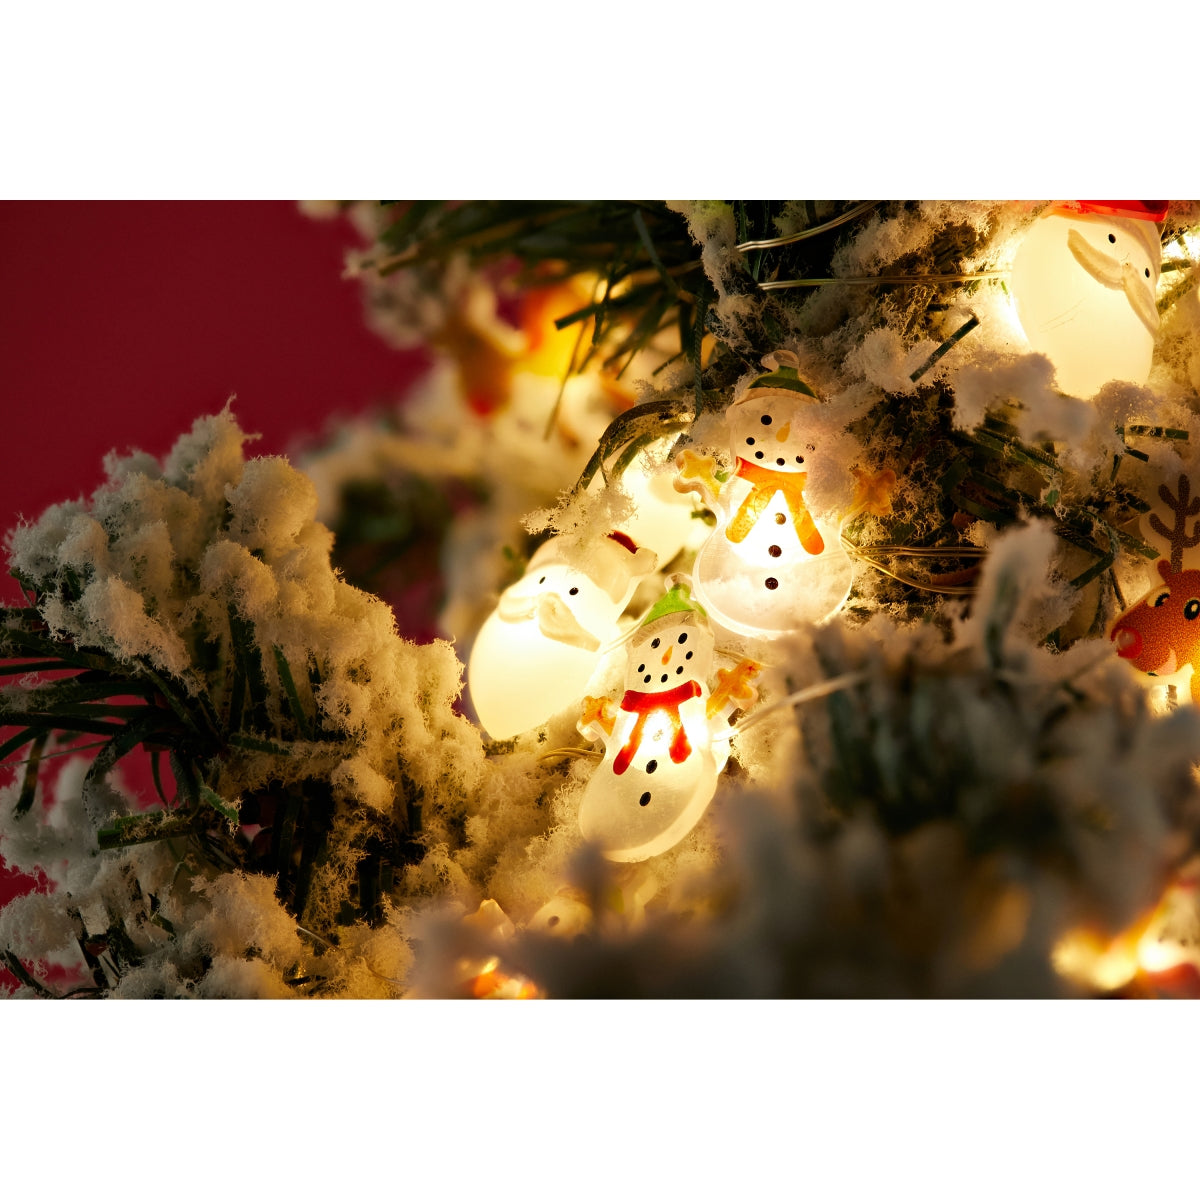 Volkano Twinkle Holiday Series Fairy Light 3M / 10 FT 30 LED